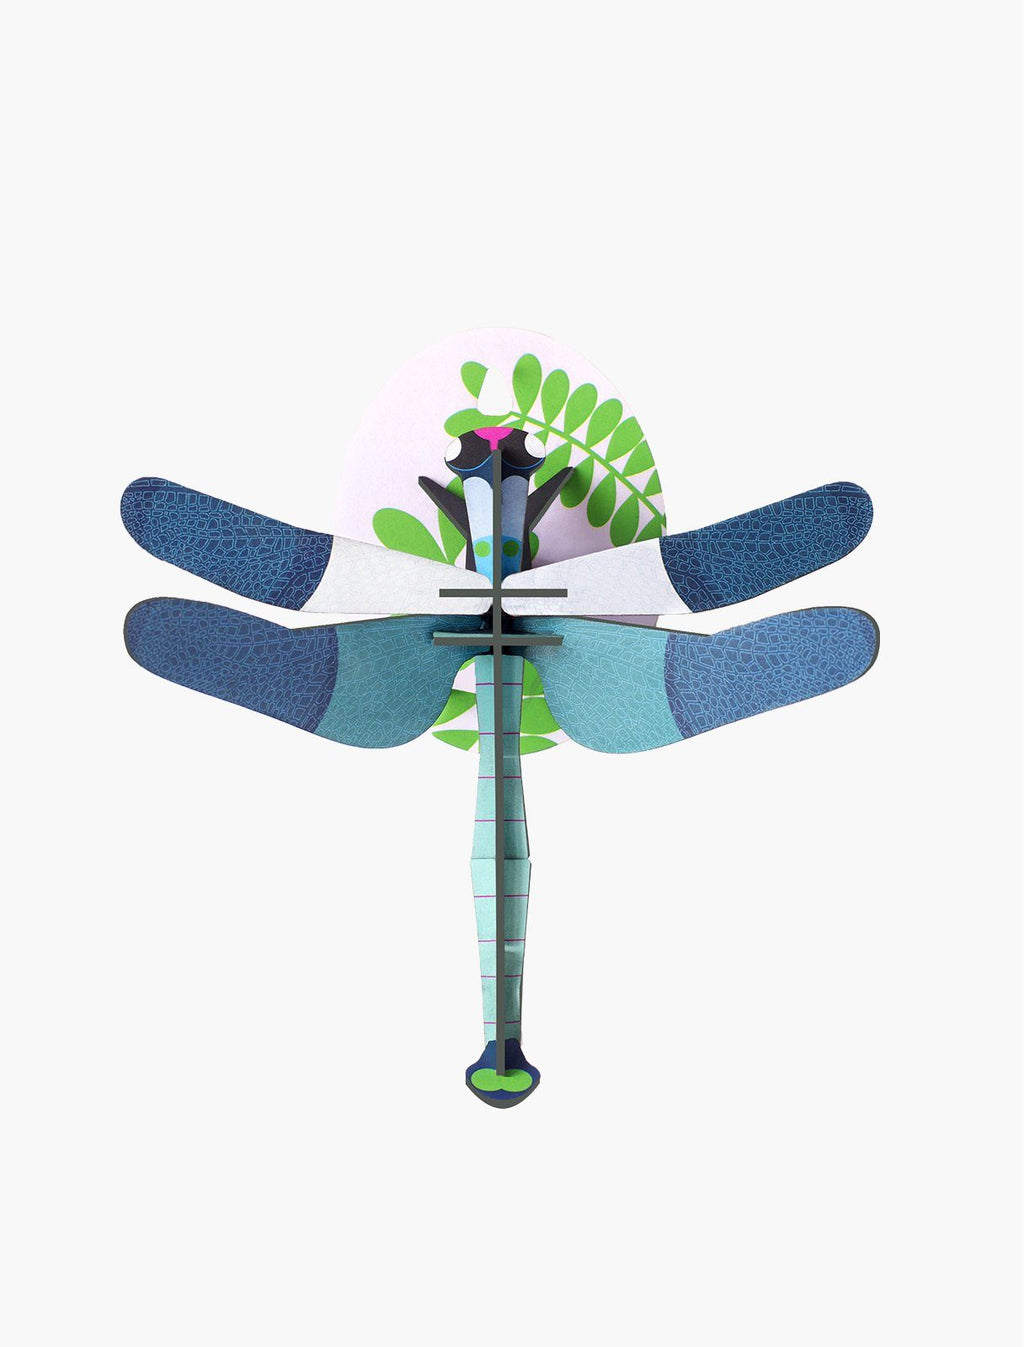 Blue Dragonfly (Arriving Late March) Studio Roof 